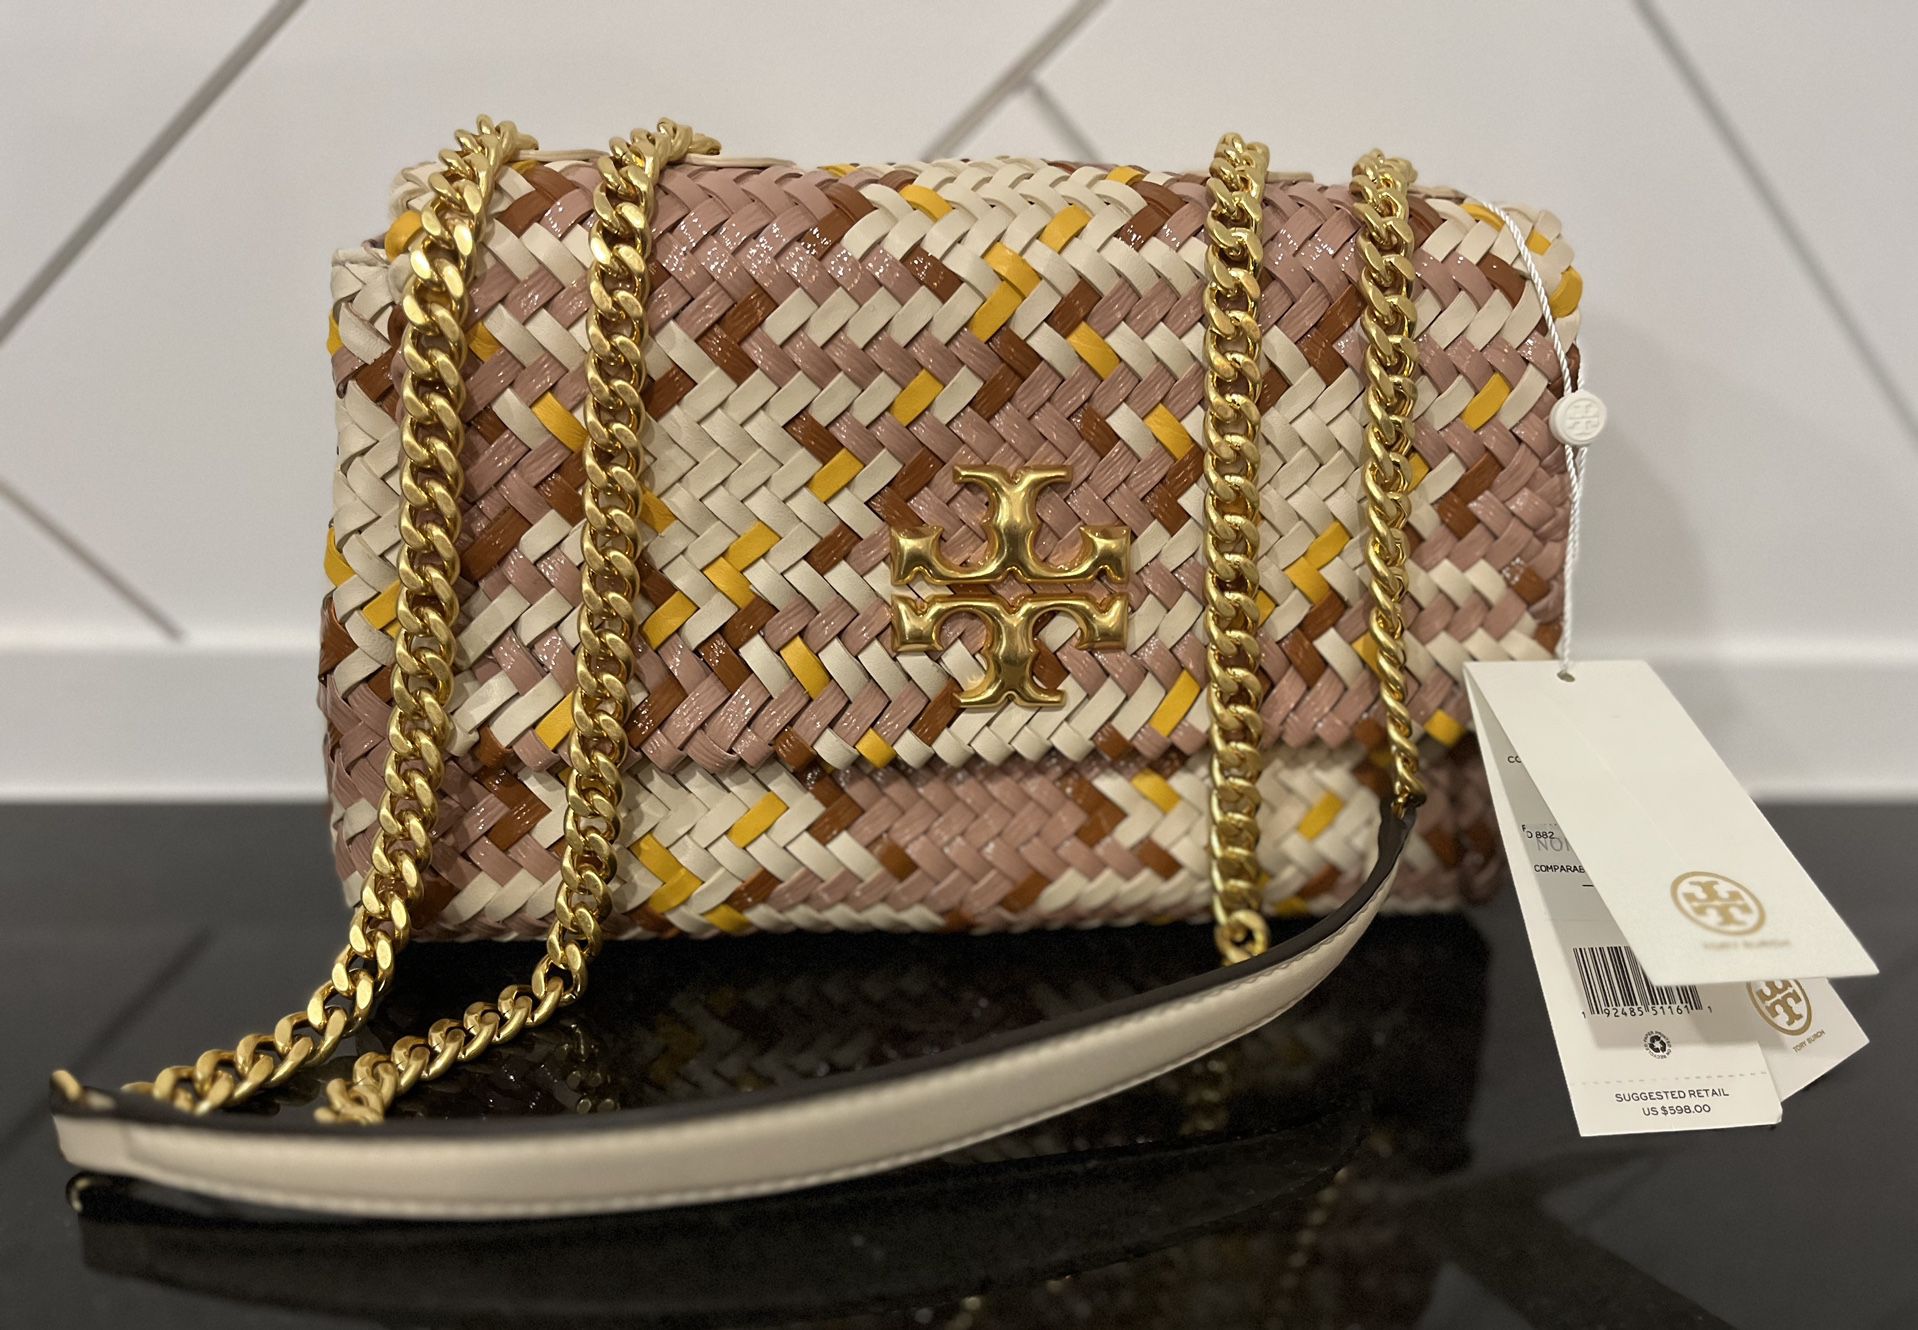 Tory Burch - Kira Woven Small Convertible Shoulder Bag for Sale in Boca  Raton, FL - OfferUp